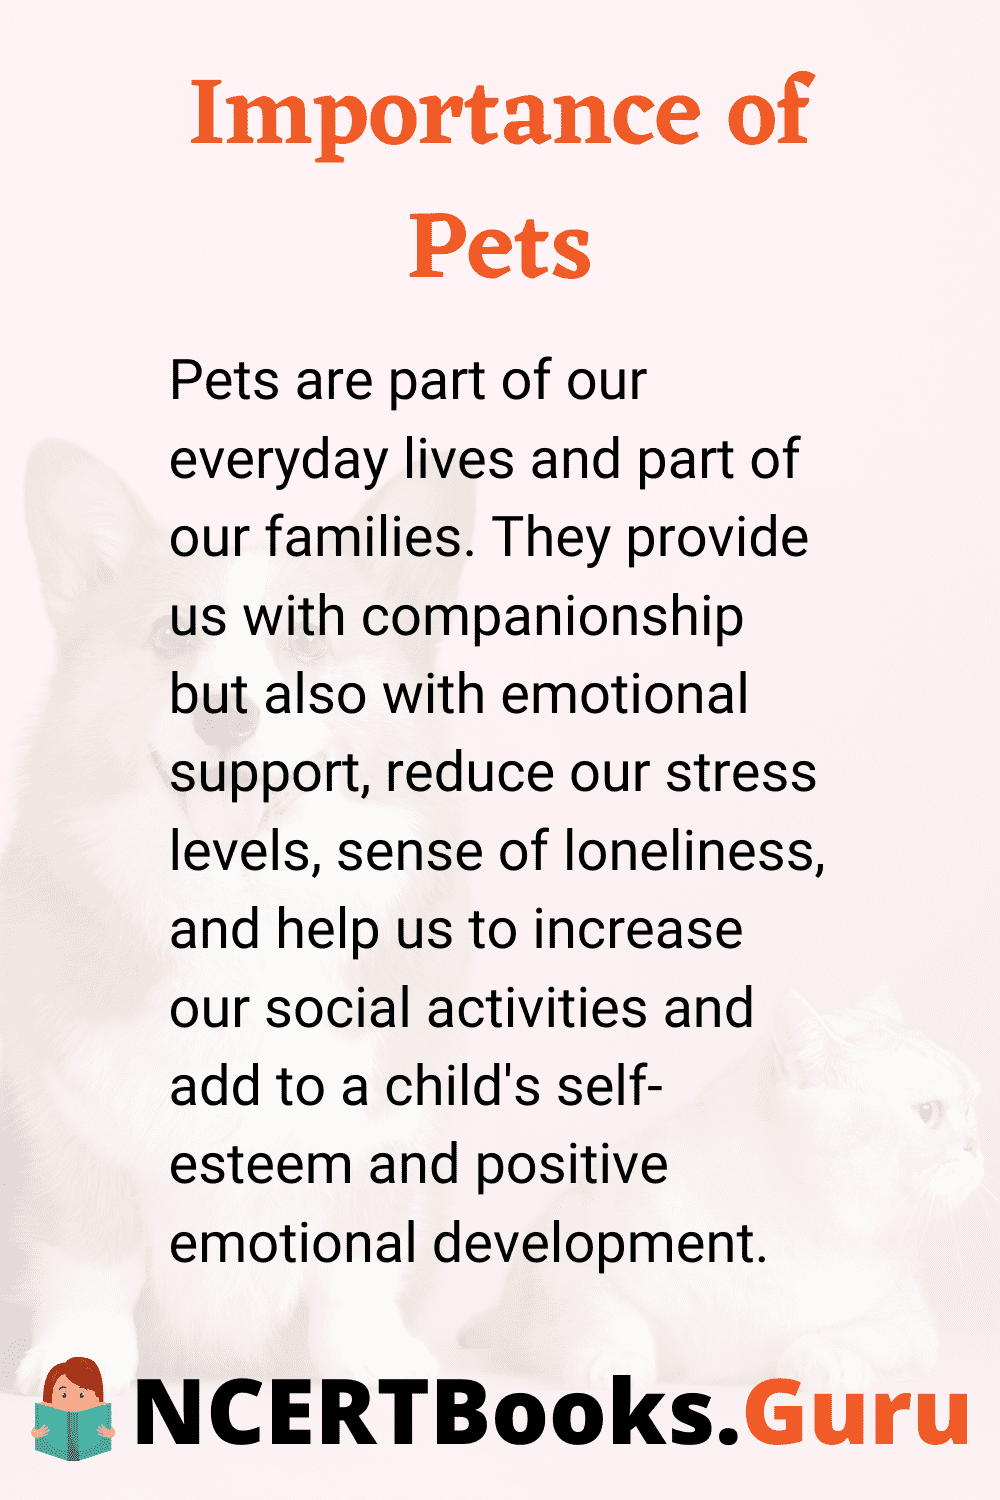 Importance of Pets